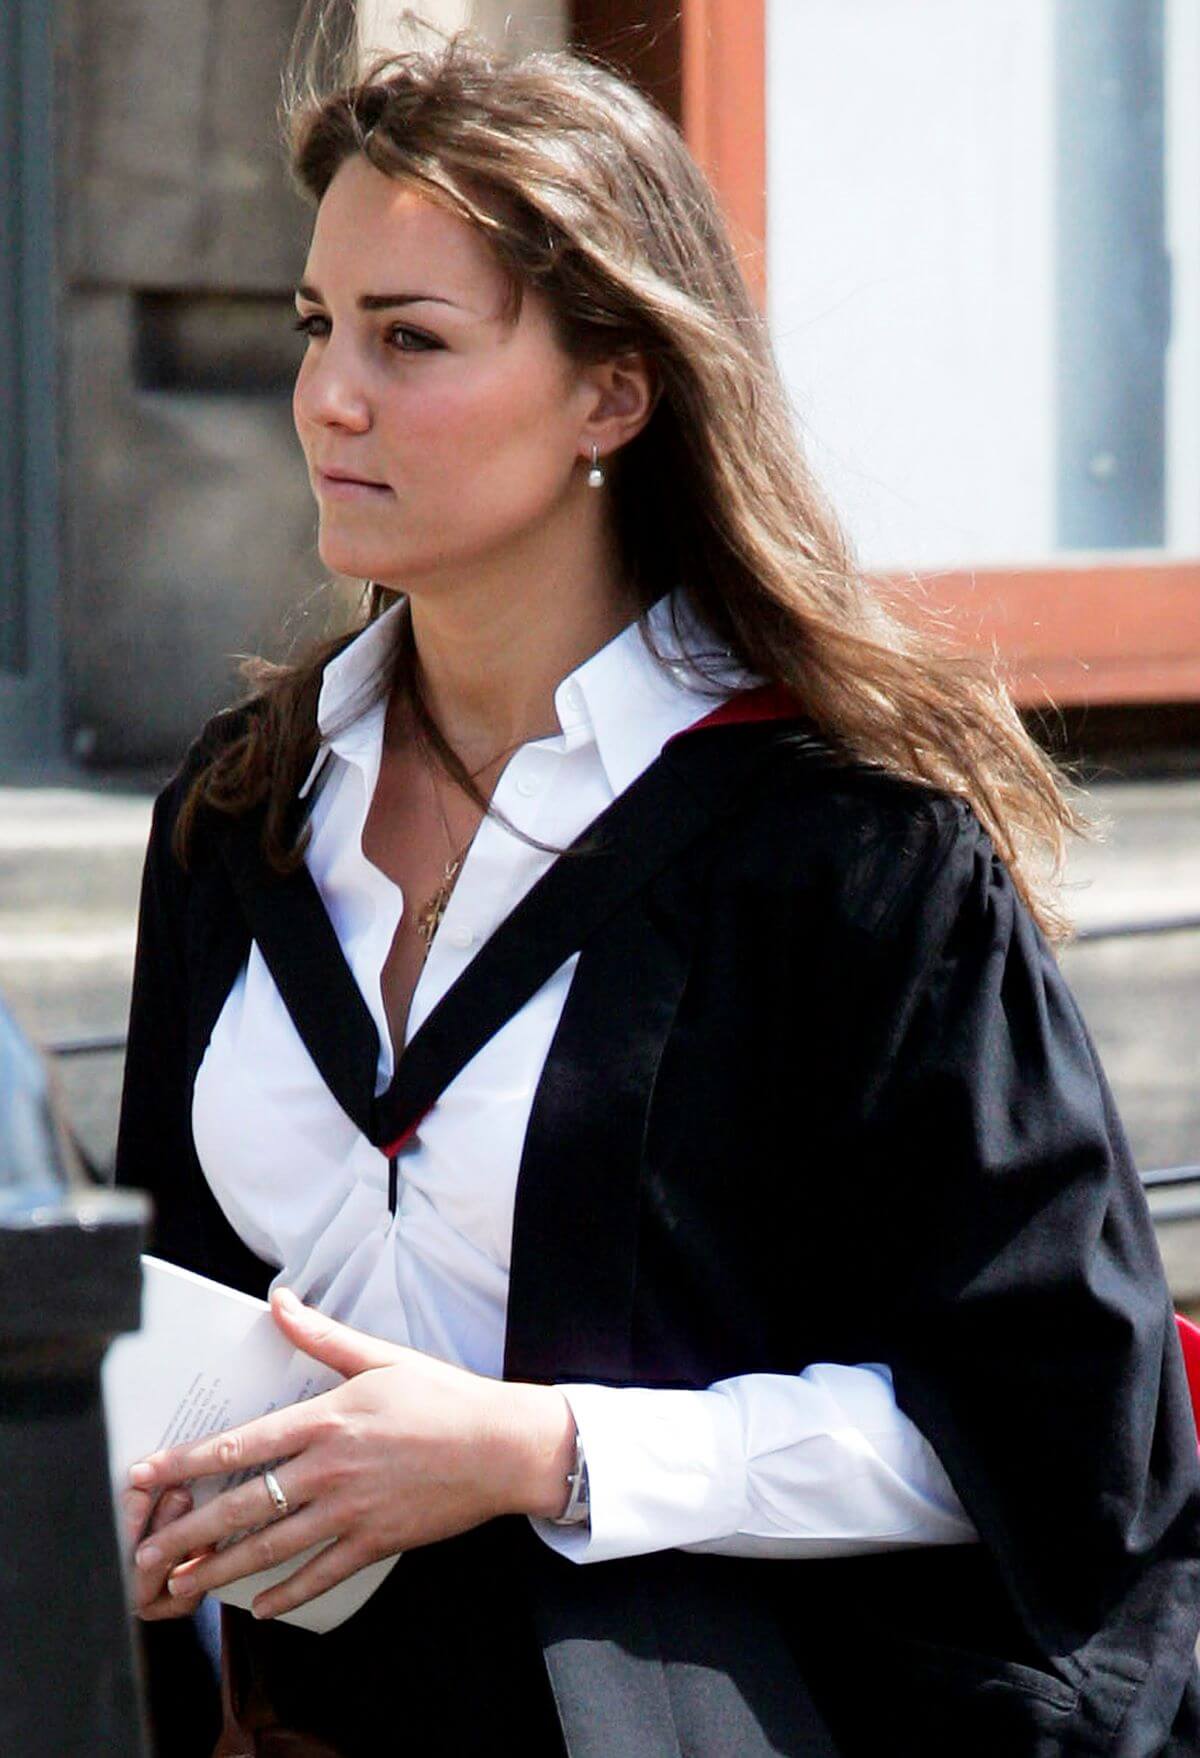 Kate Middleton wears a traditional gown to the graduation ceremony at St. Andrew's University